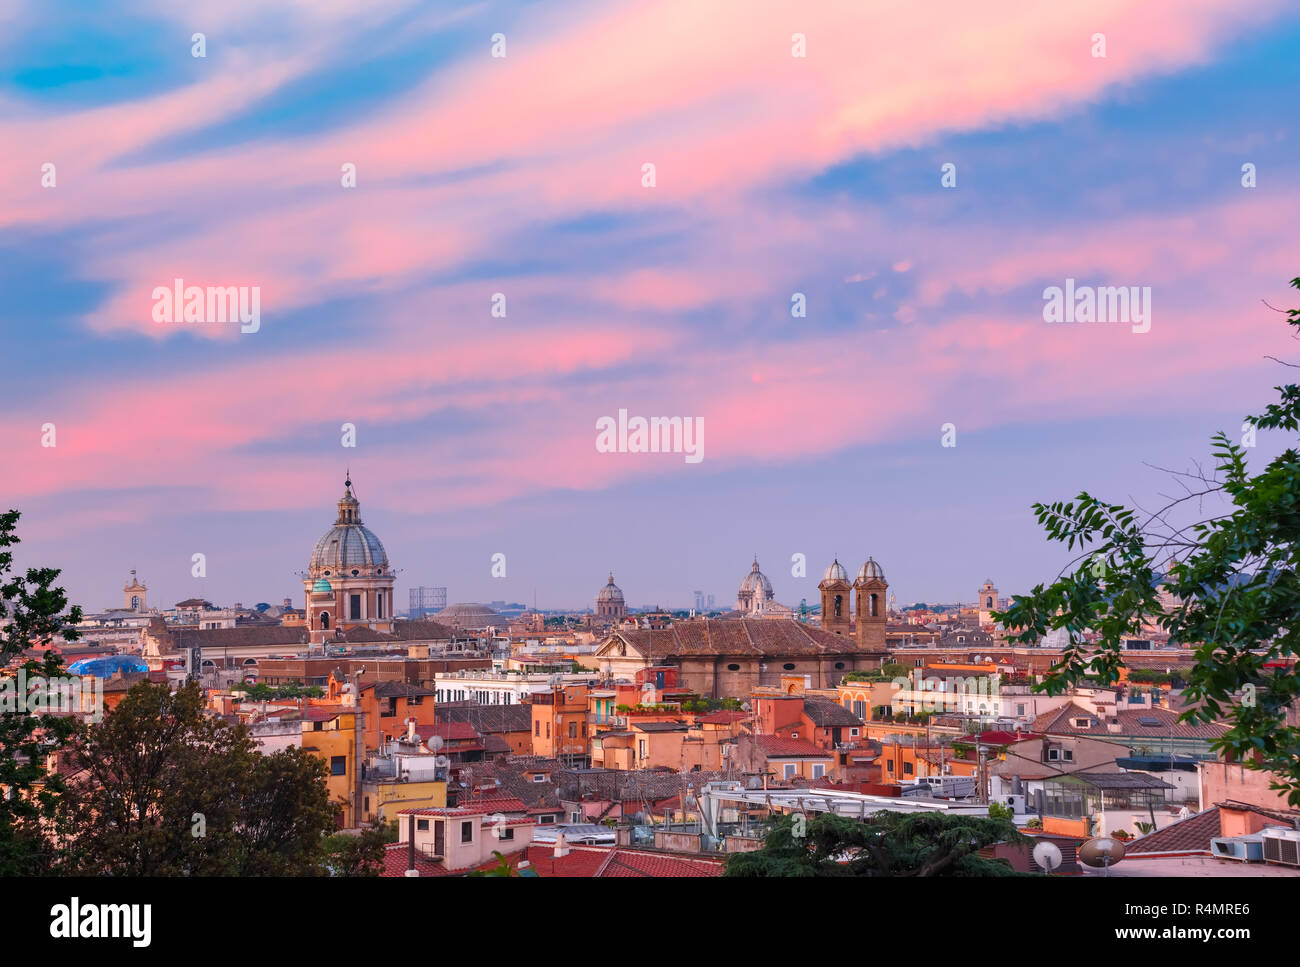 Aerial wonderful view of Rome at sunset, Italy Stock Photo